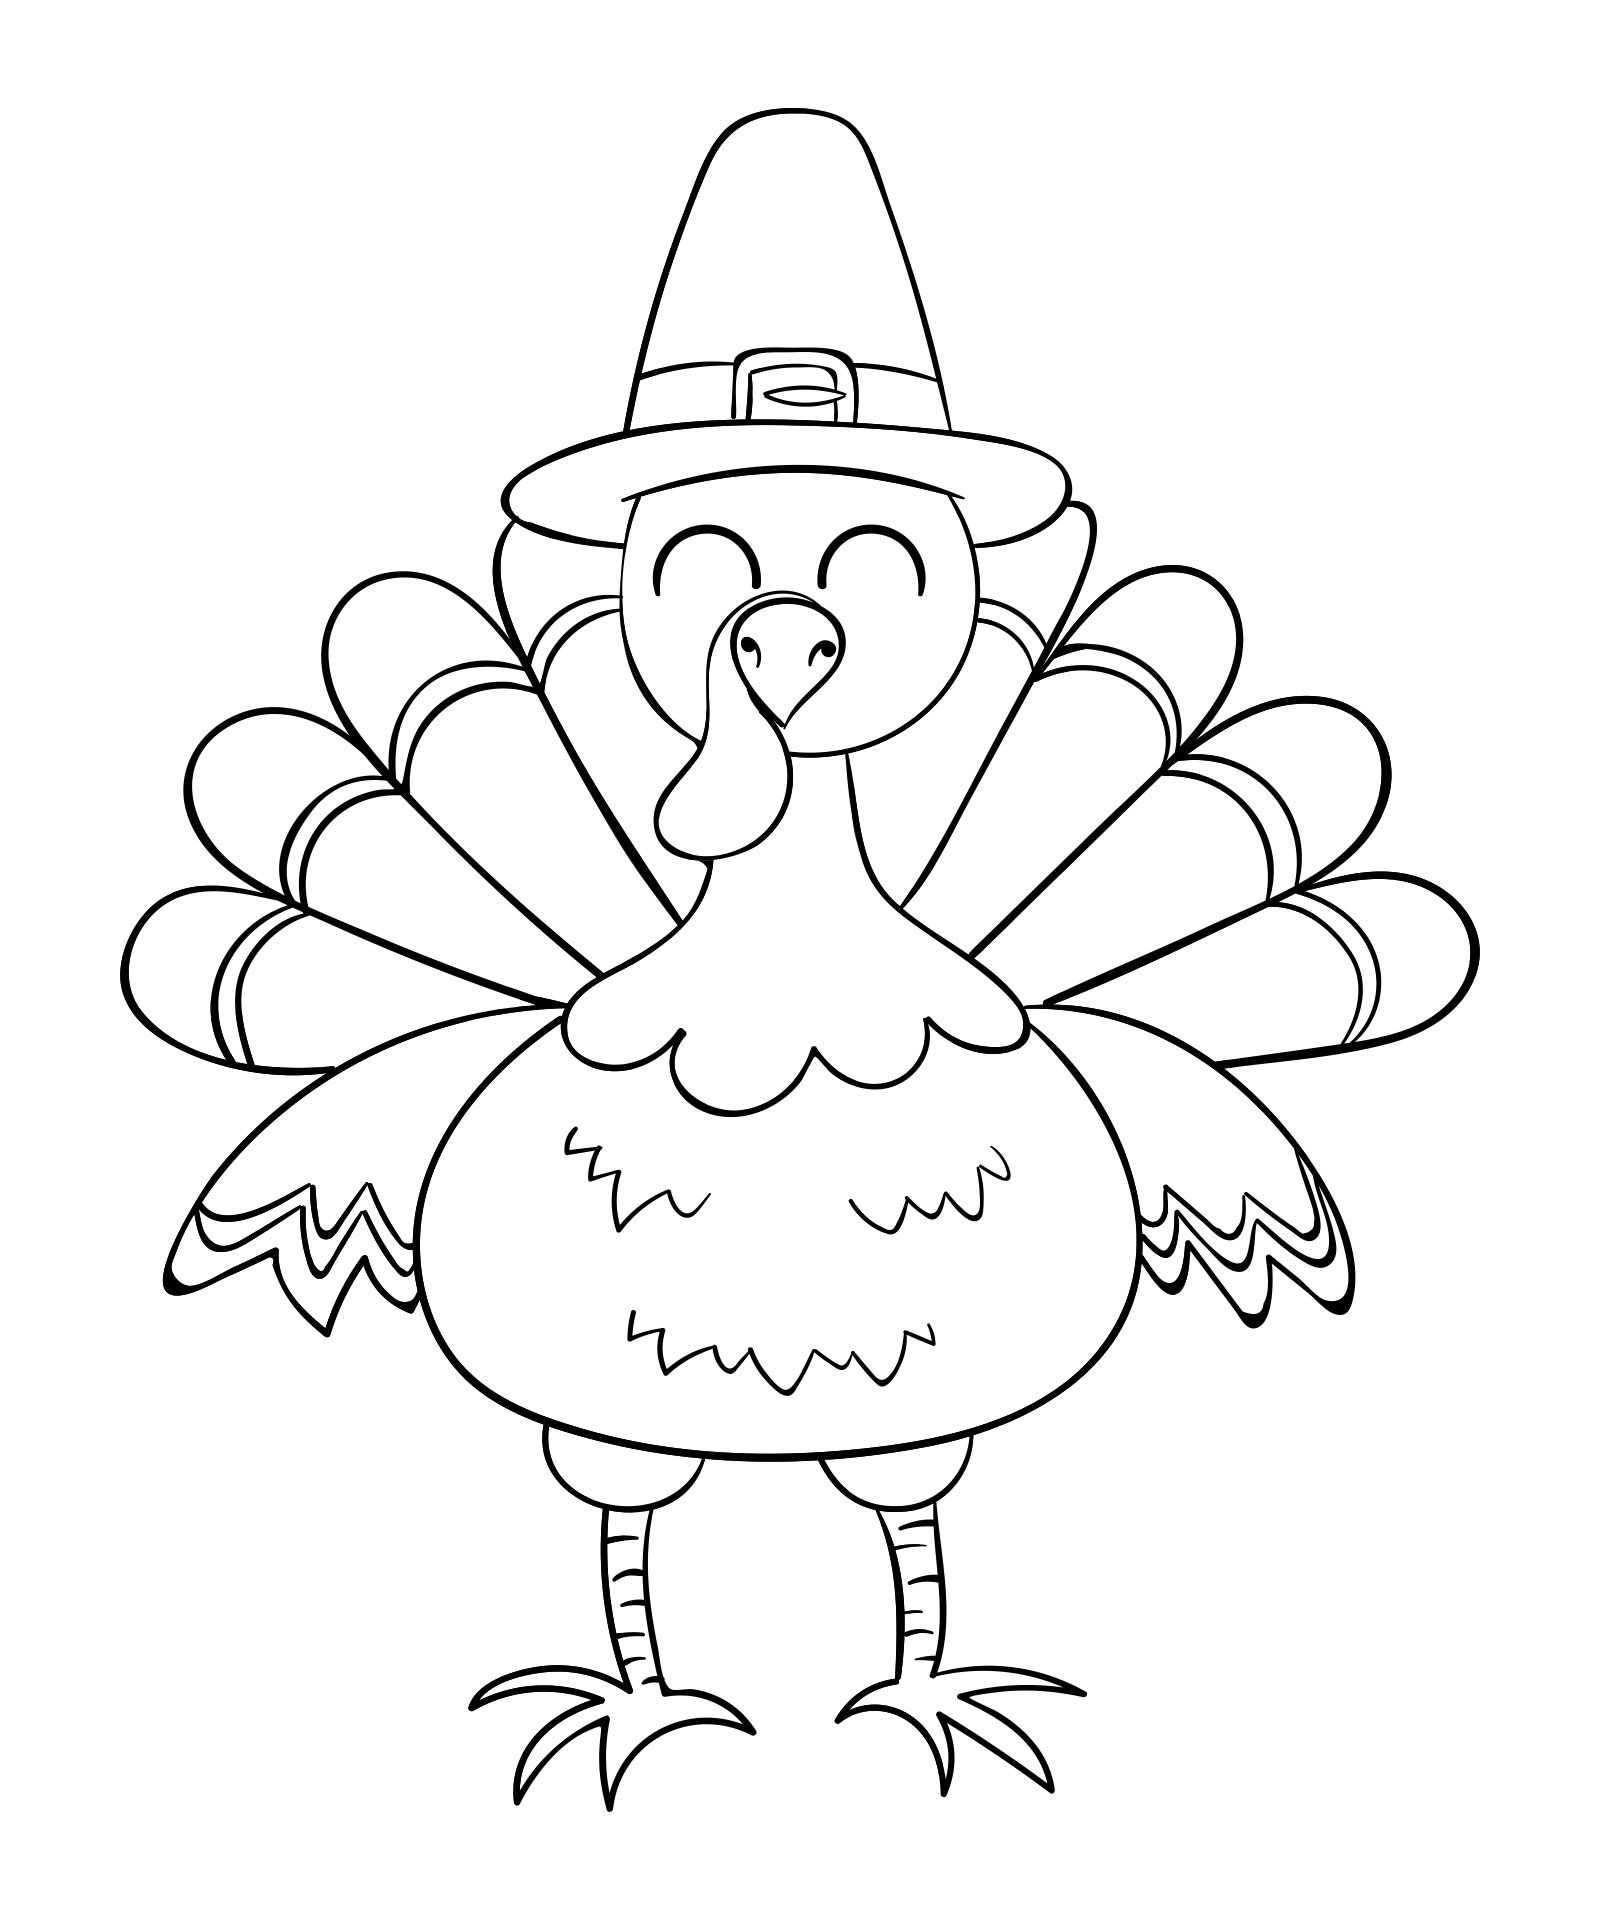 Printable Turkey Coloring Pages Already Colored